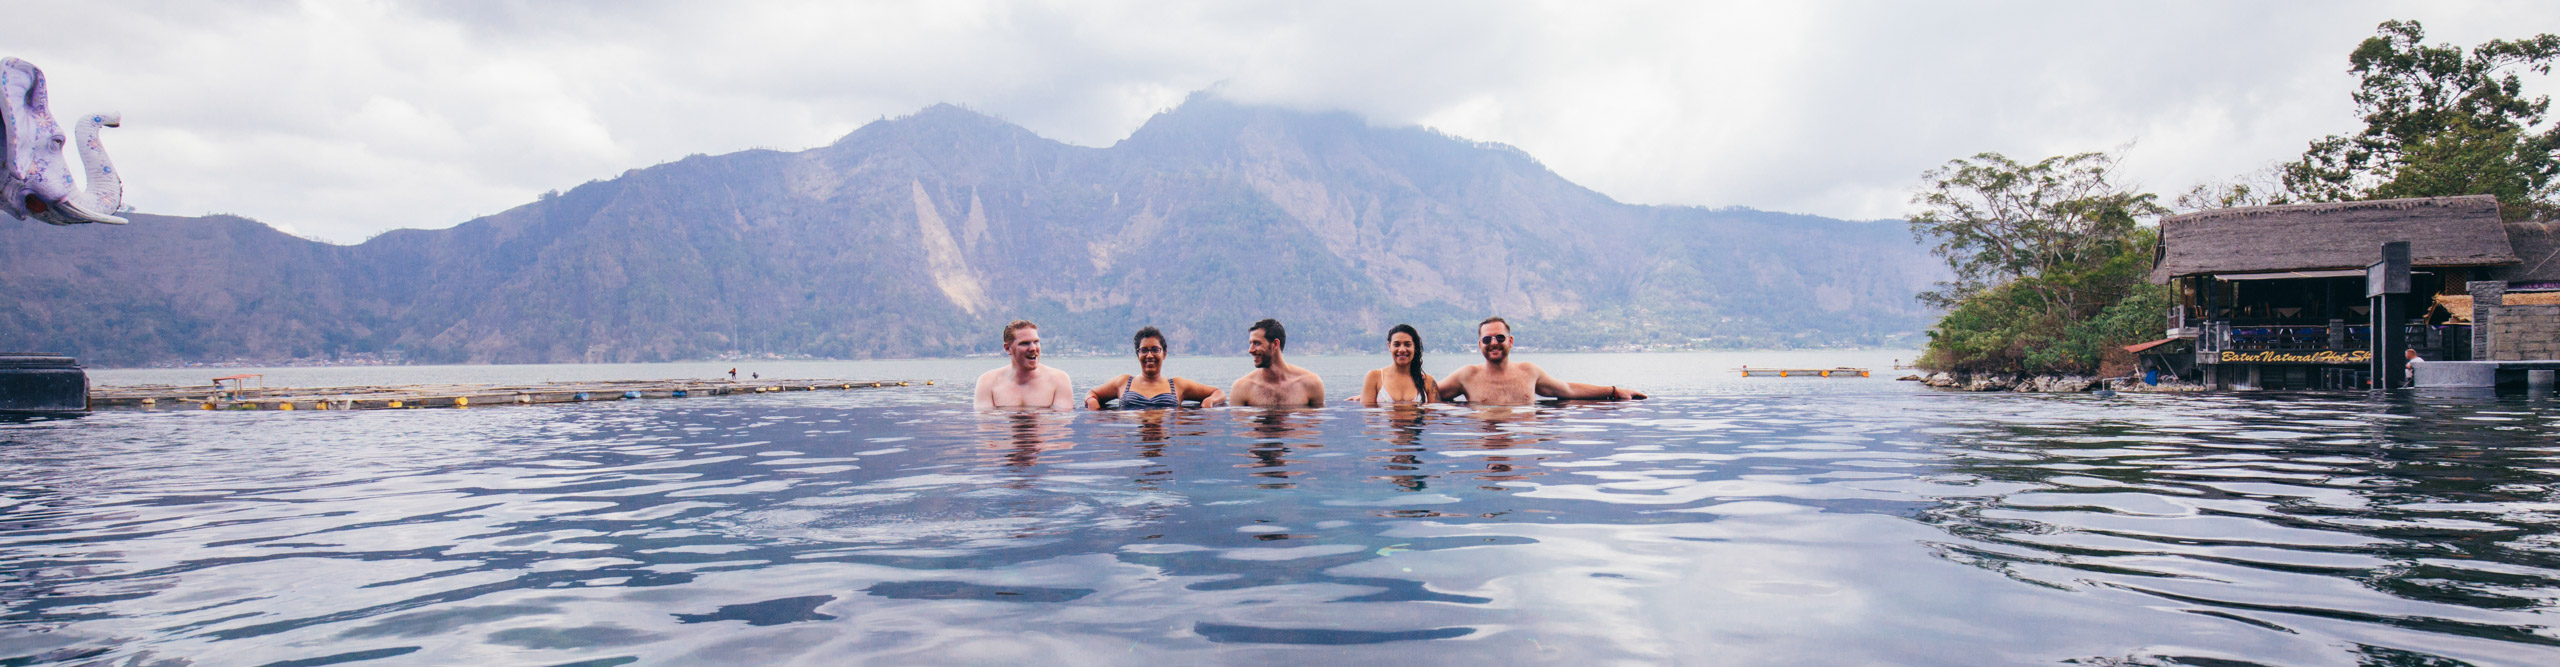 Group talking and laughing in infinity pool in front of mountain on a cloudy day in Bali